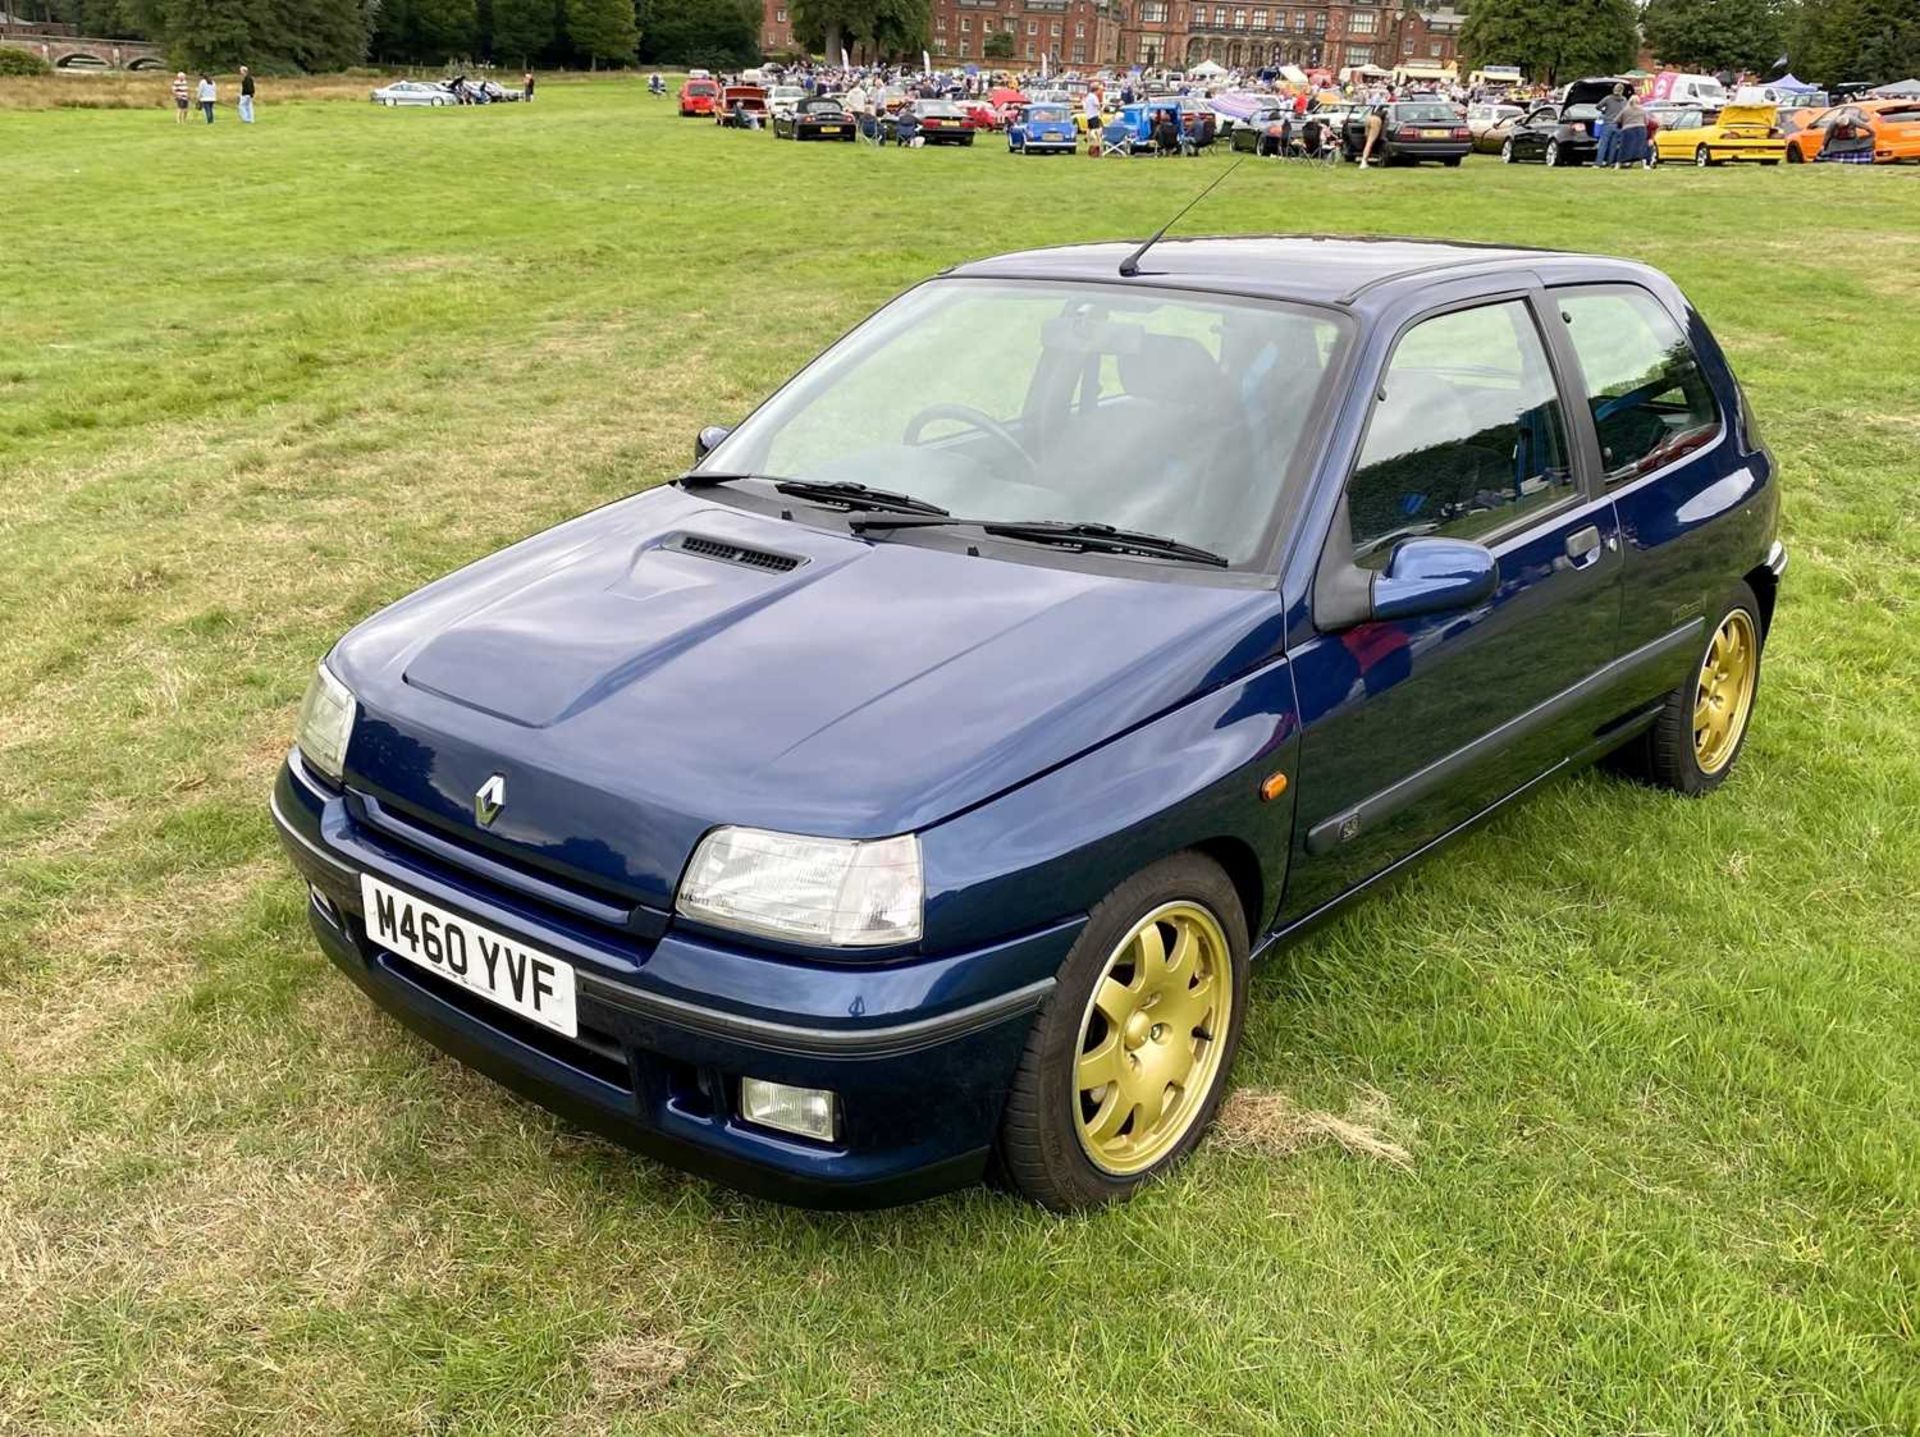 1995 Renault Clio Williams 2 UK-delivered, second series model and said to be one of just 482 produc - Image 4 of 66